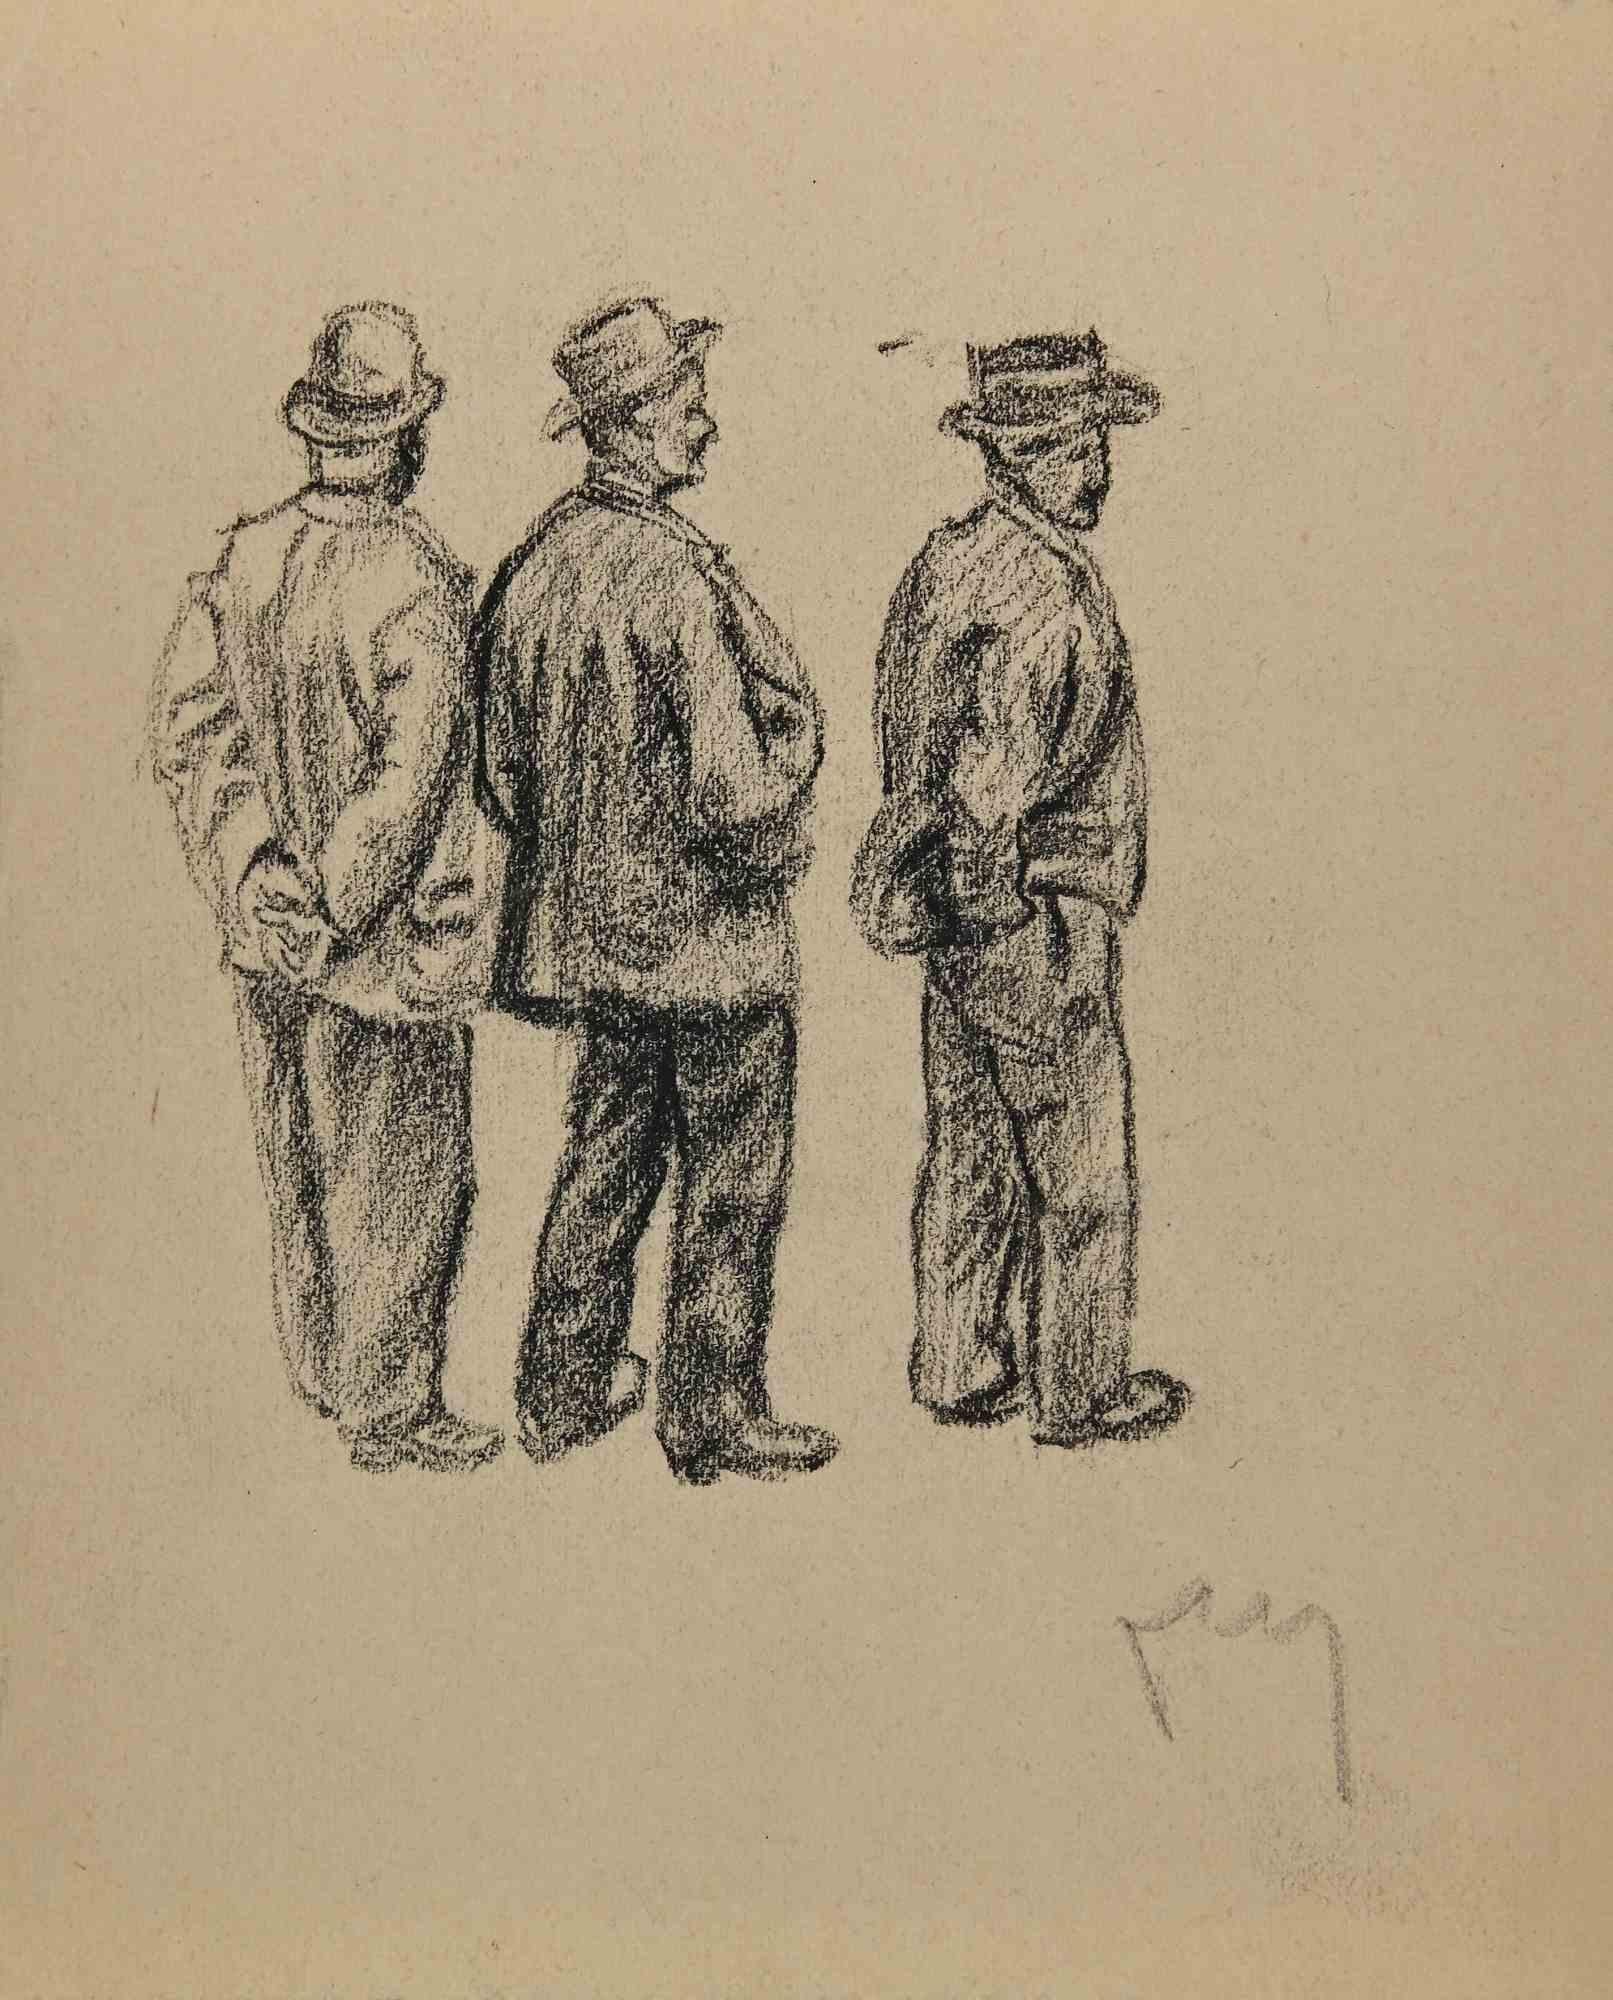 Unknown Figurative Art - The Standing Men - Original Drawing - Early 20th Century